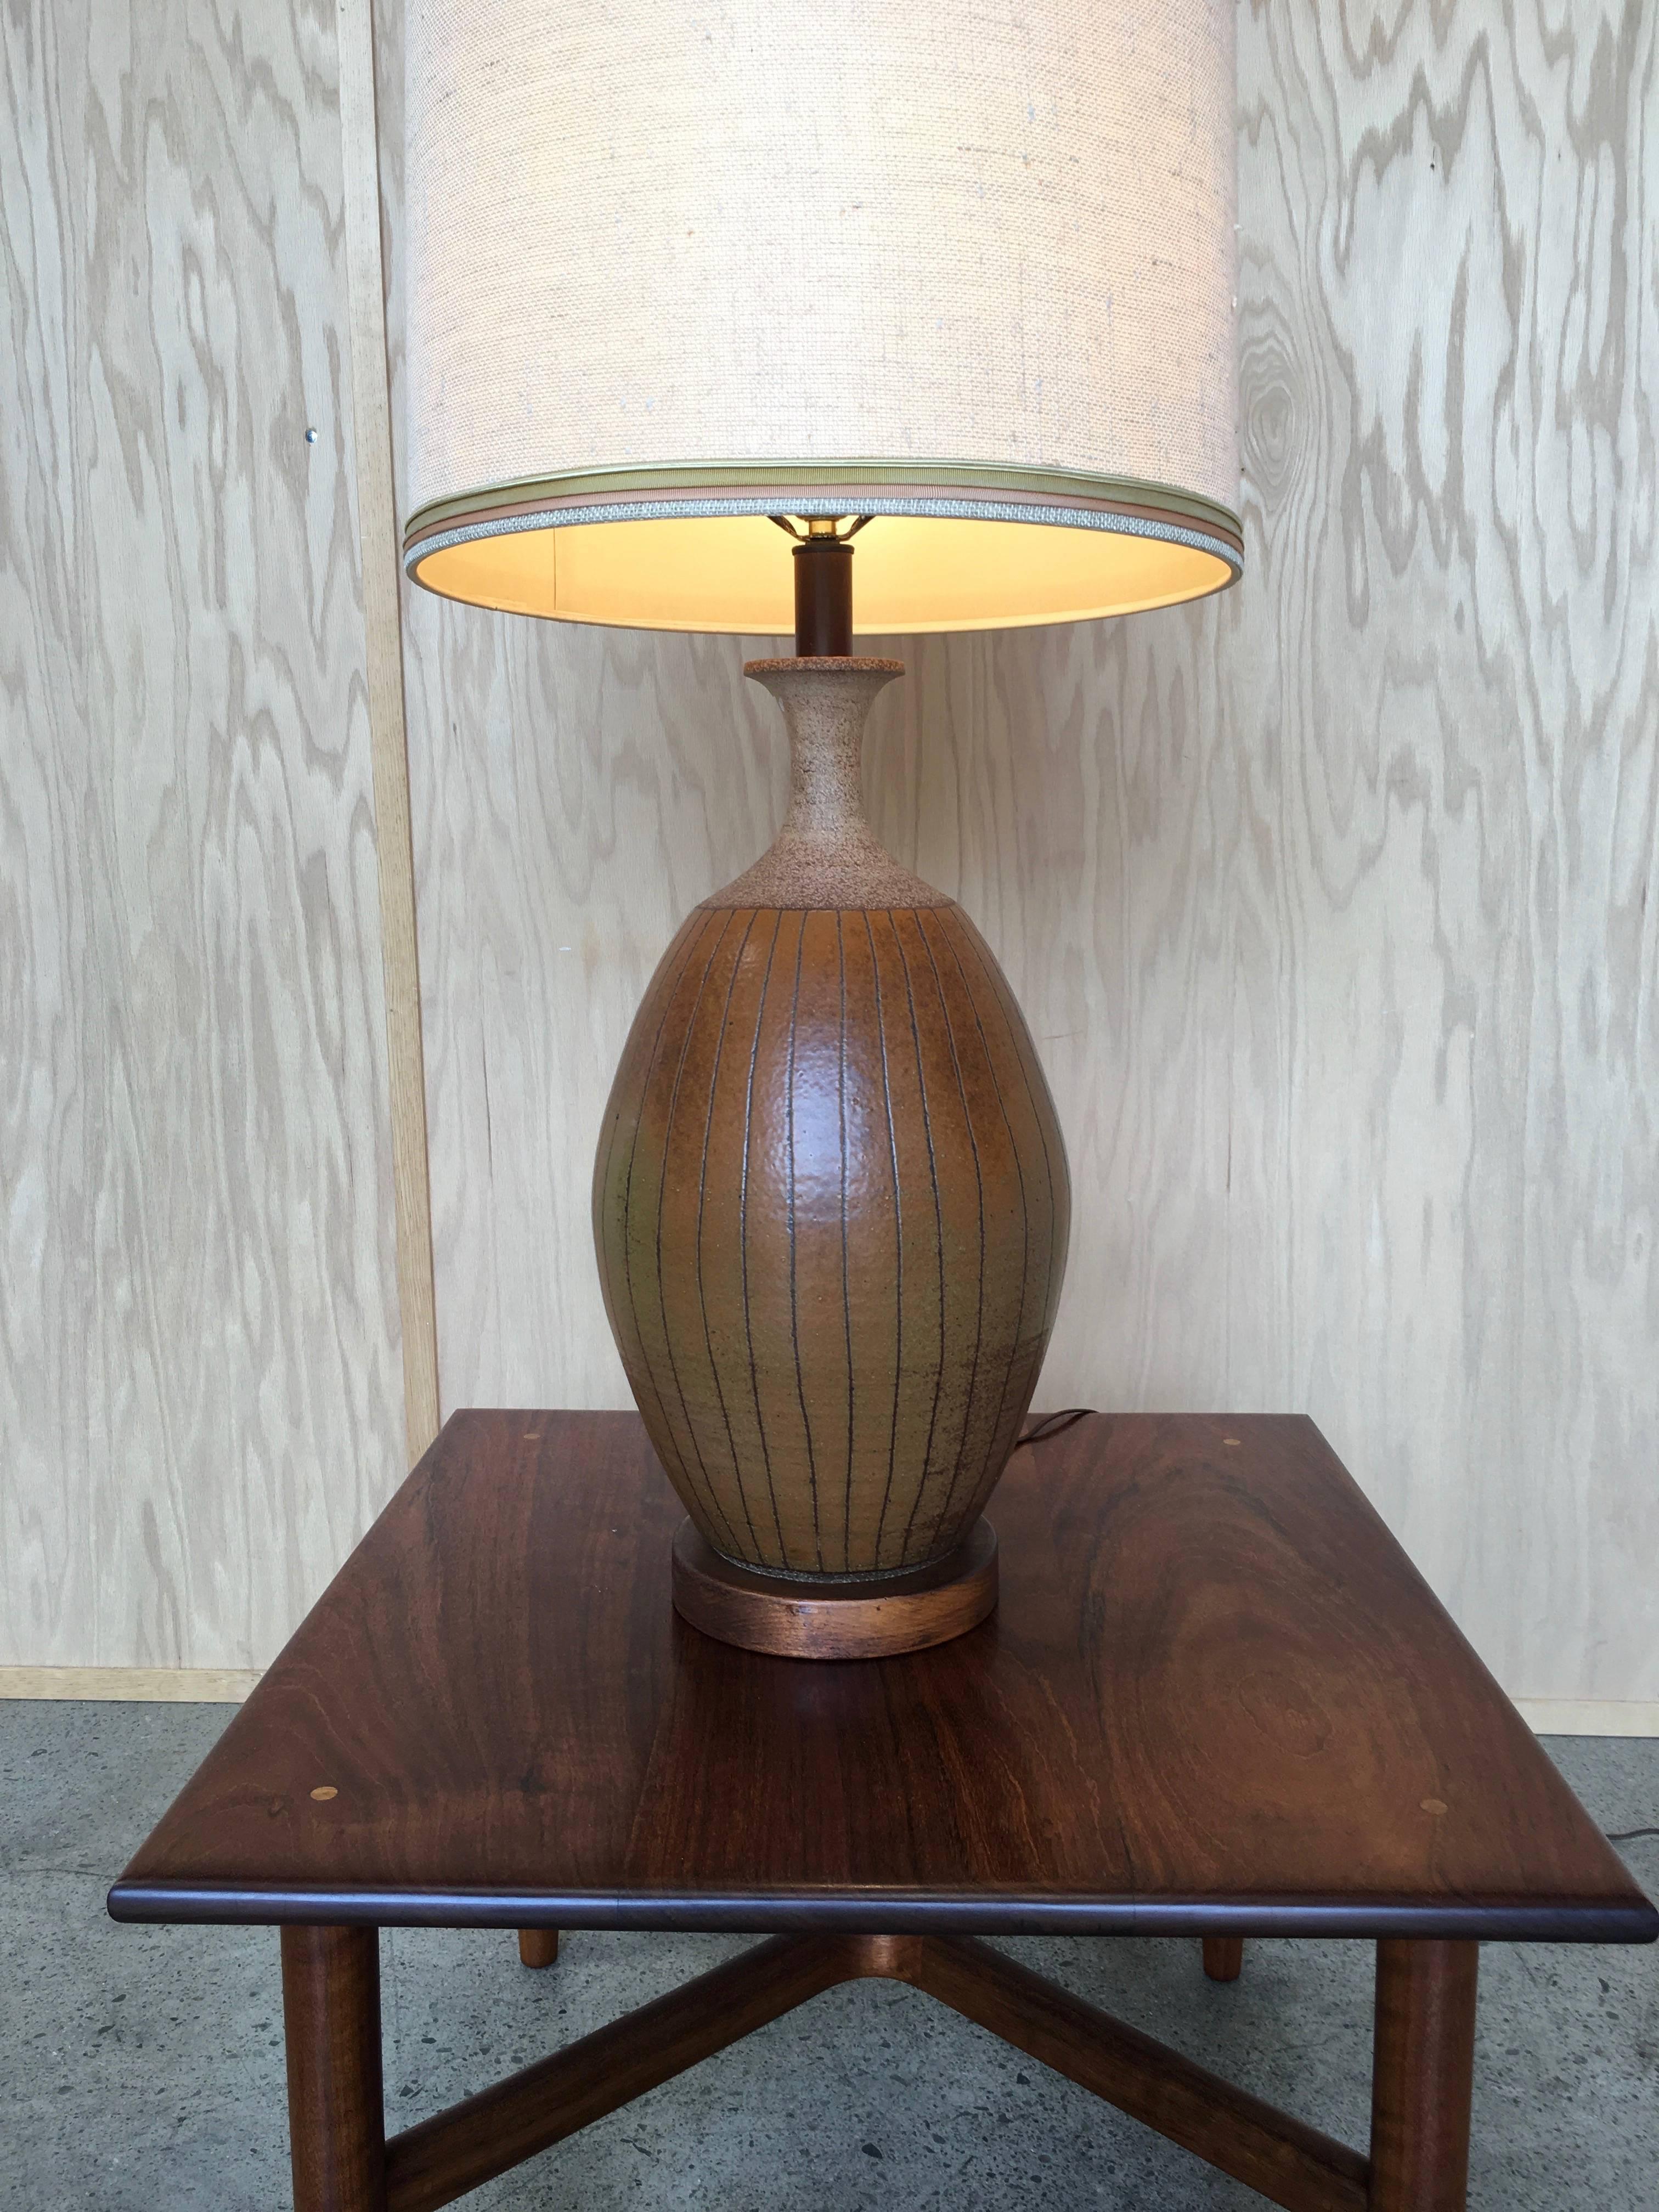 1960s, ceramic table lamp by Brent Bennett with wood base 
The shade is original but client might want to replace 
The base is 11" wide and 26" high to the top of the socket.